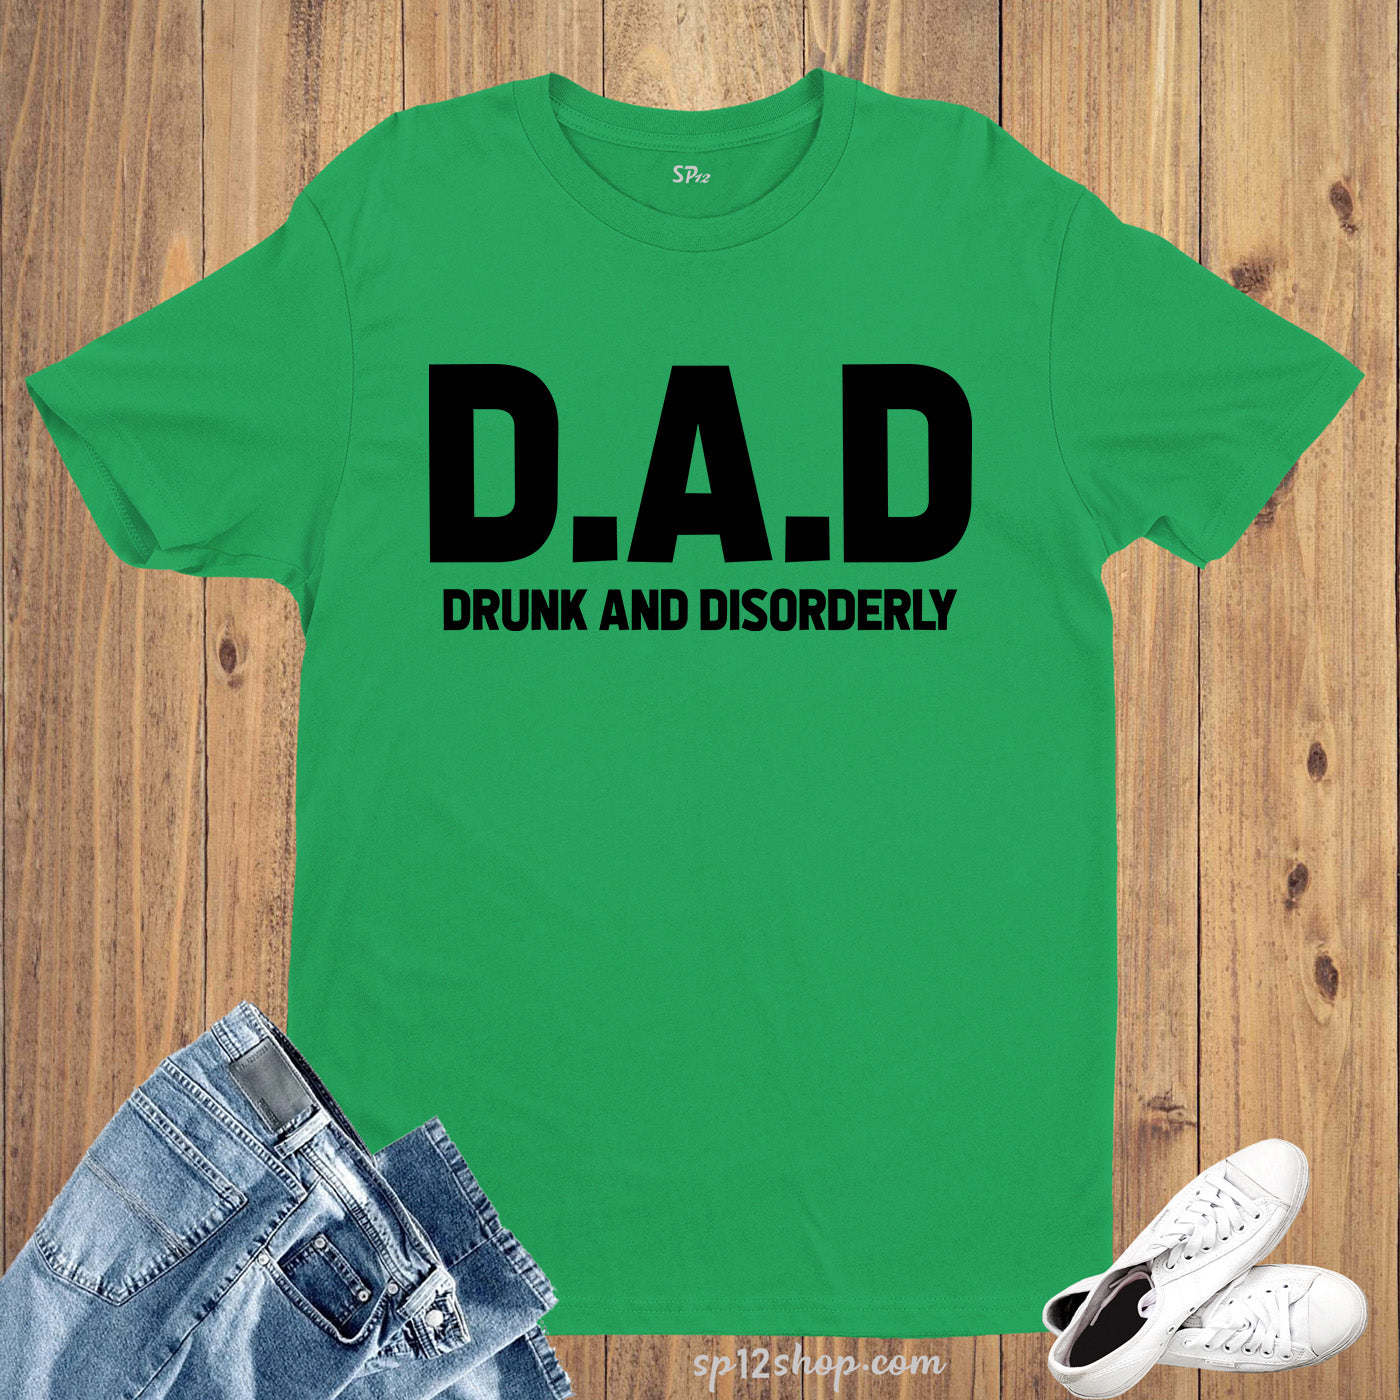 Dad T-Shirt Drunk and Disorderly Tee